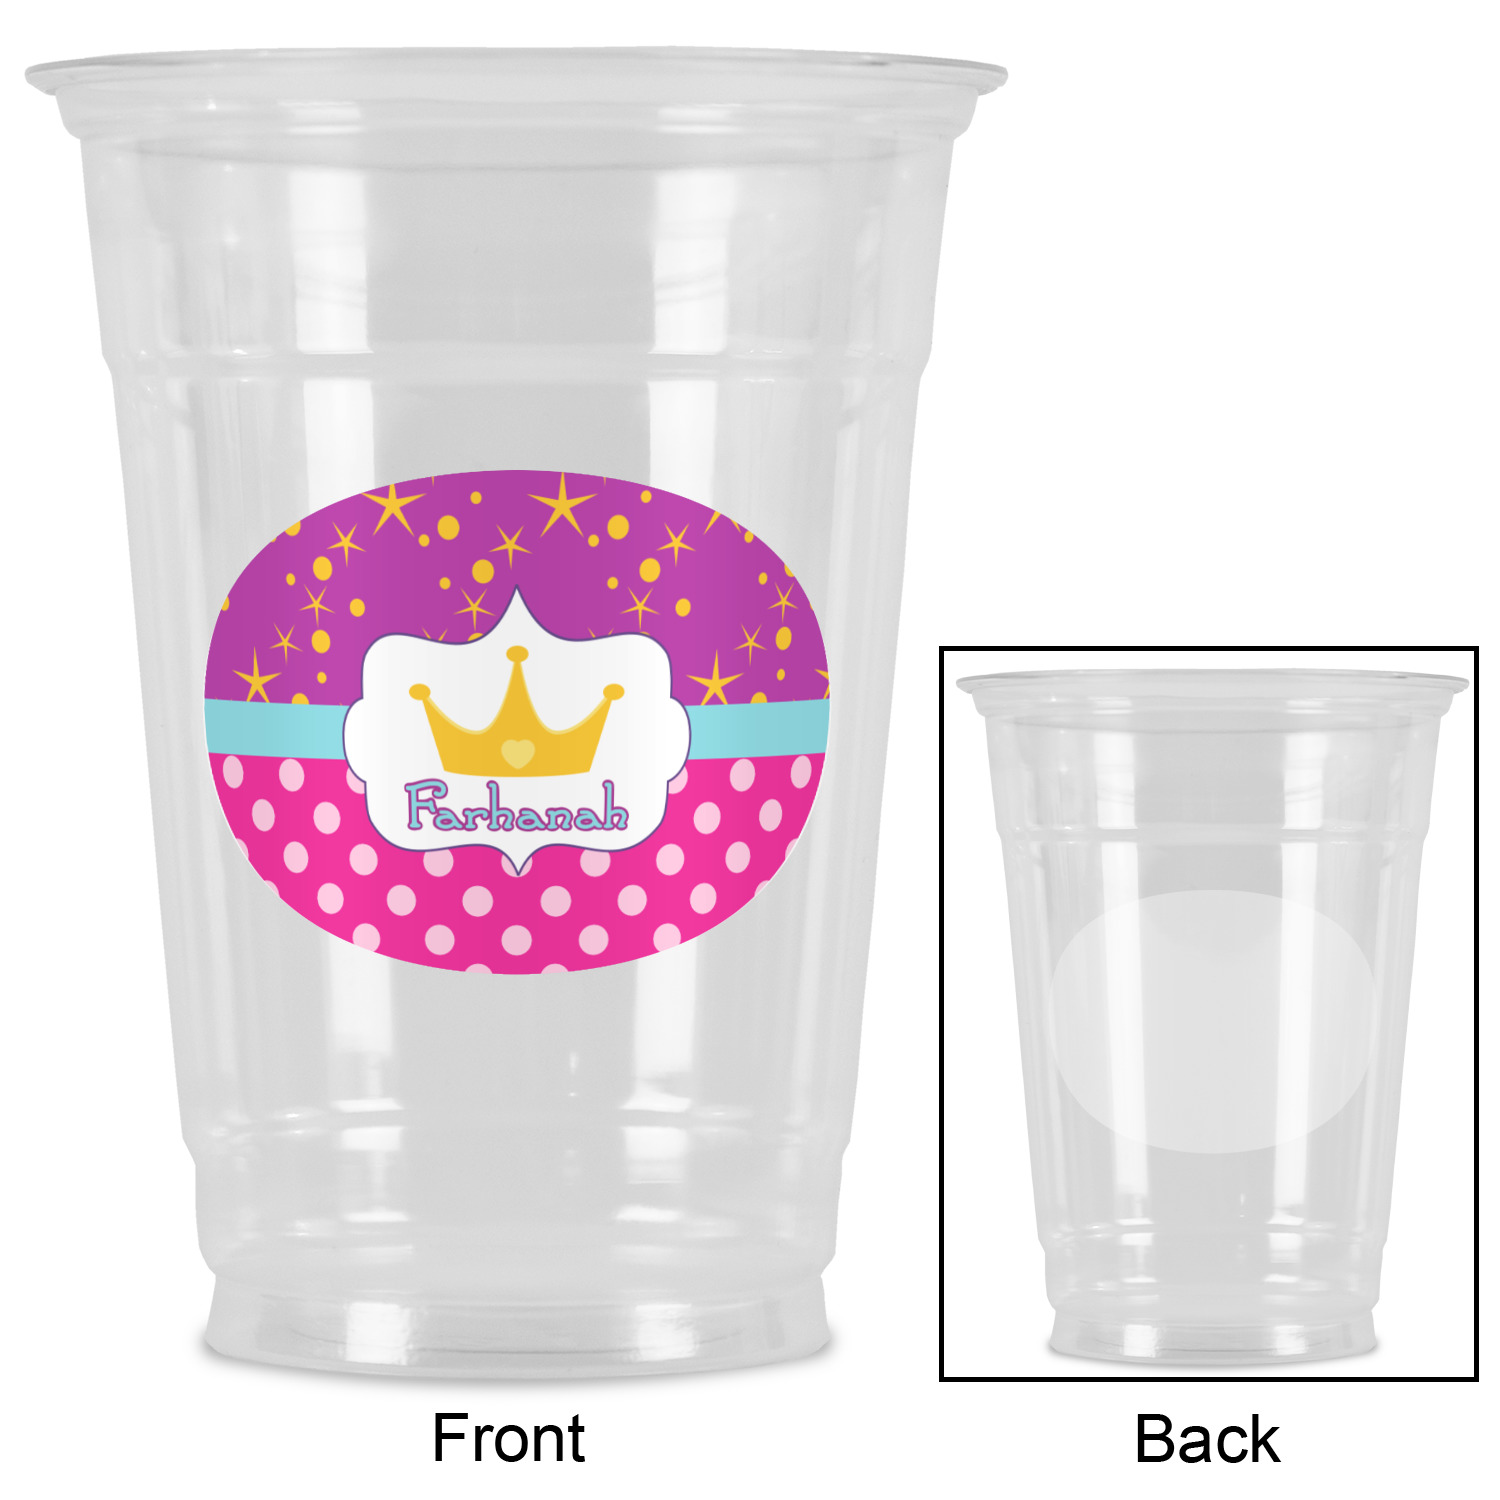 Personalized Tumbler Lid Topper, Personalized Colorful Tumbler Topper, Name  Plate, Cup Name Tag, Polka Dots Tumbler Topper, Tumbler Cup Accessories